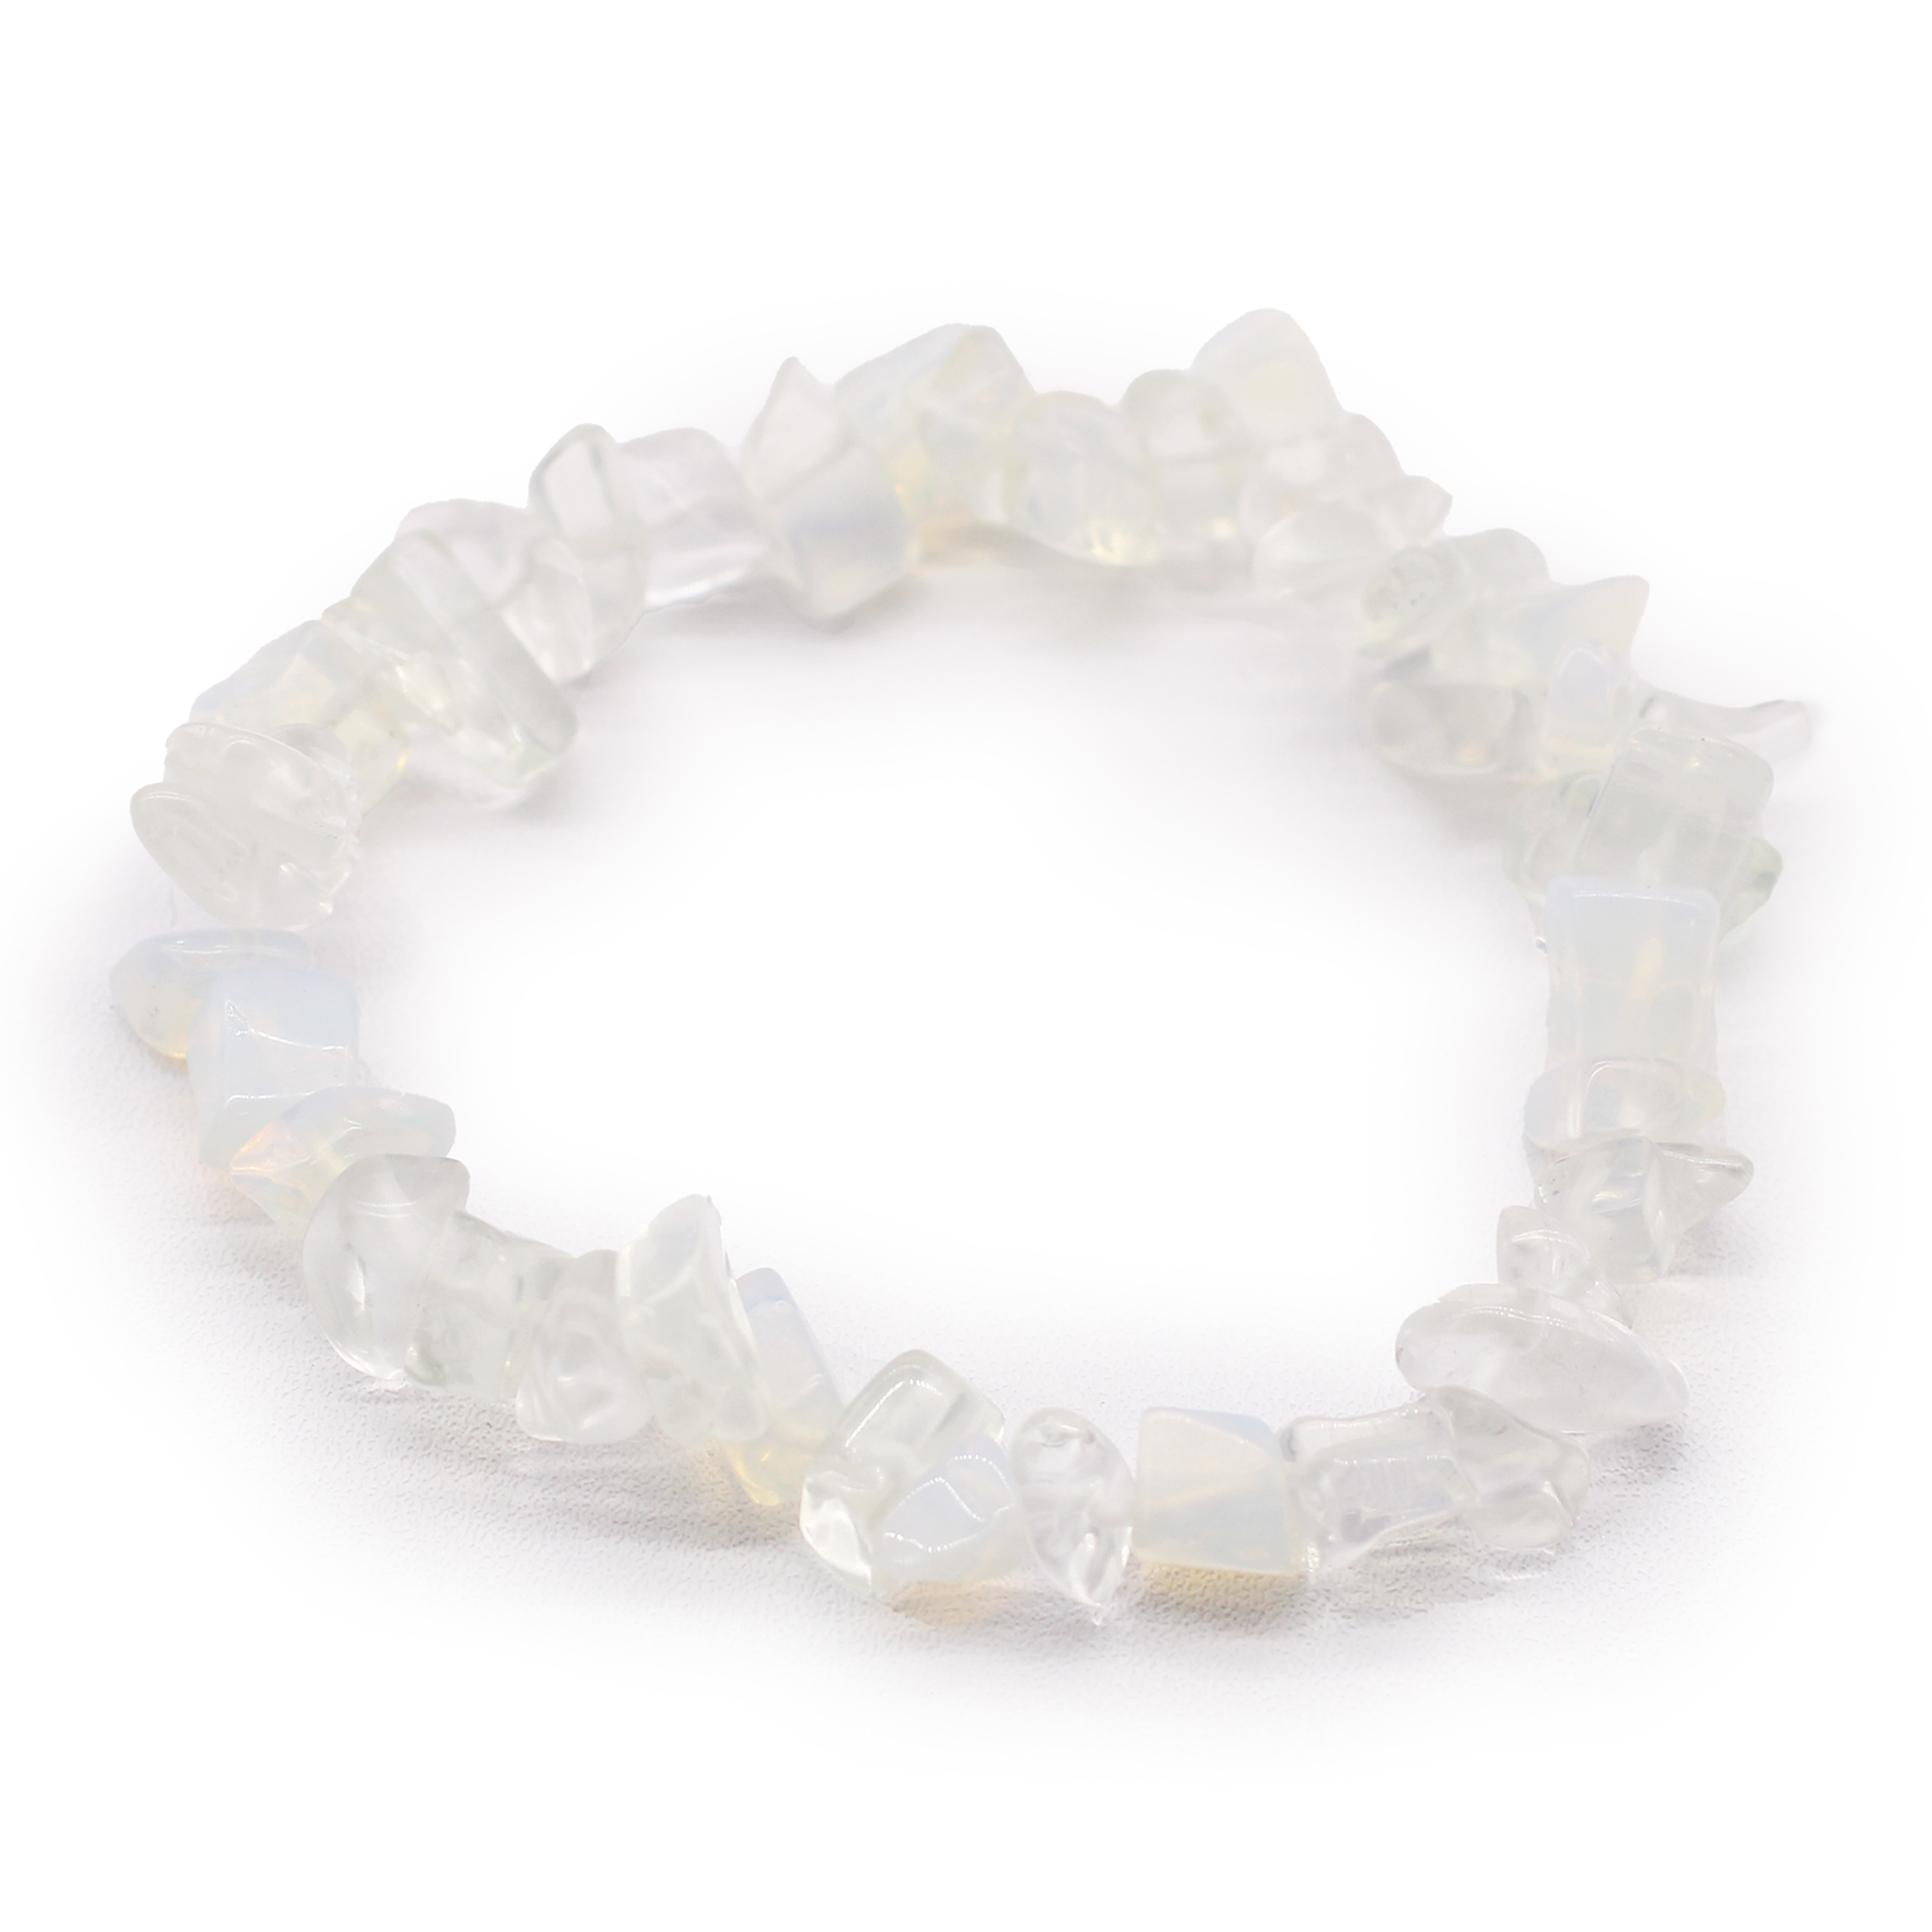 Buy KITREE NATURAL OPALITE CRYSTAL BRACELET 8MM ROUNDFOR UNISEX (COLOR OFF  WHITE) at Amazon.in